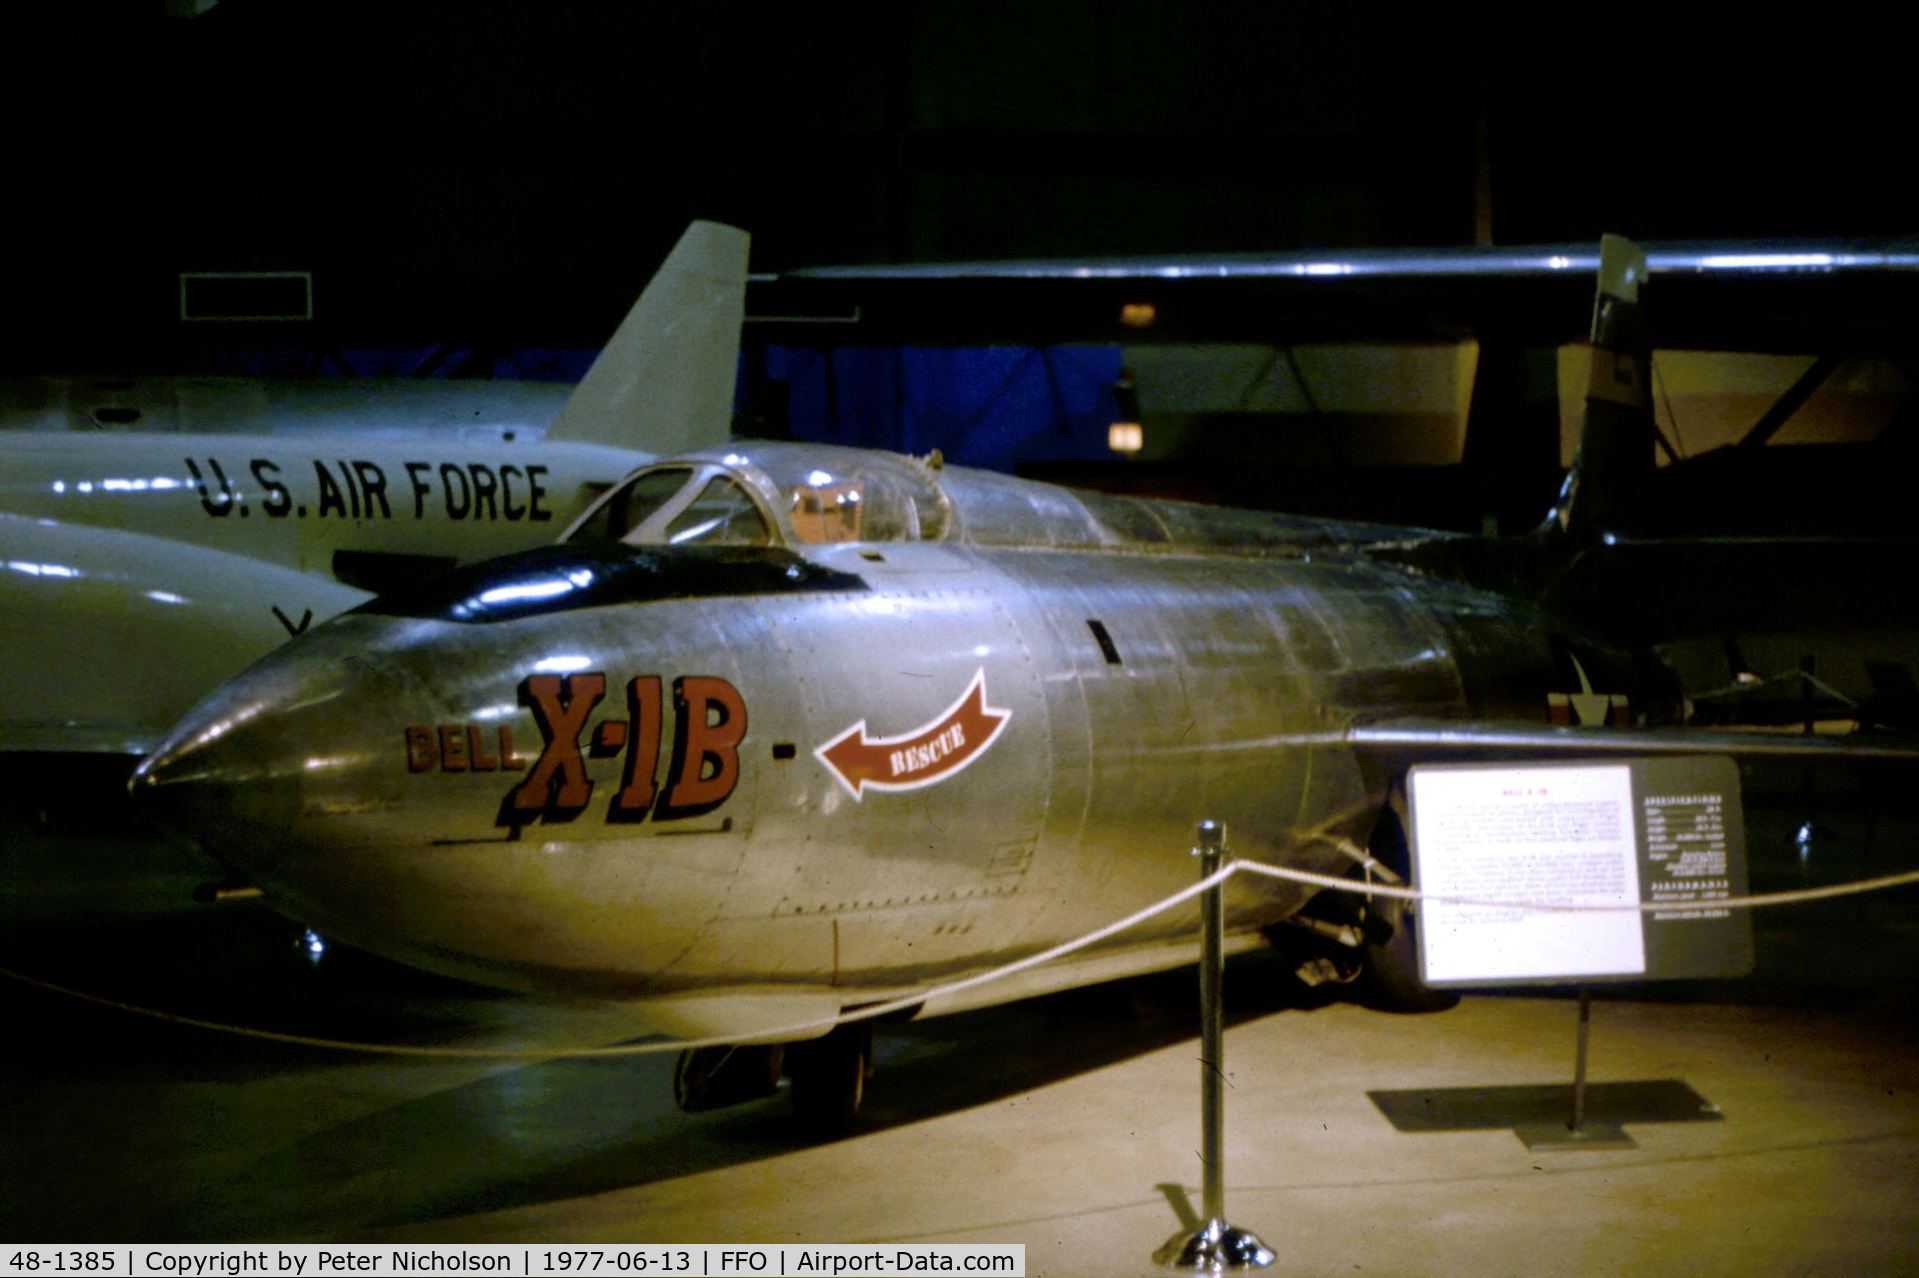 48-1385, 1948 Bell X-1B C/N Not found 48-1385, The Bell X-1B as seen at the USAF Museum in the Summer of 1977.